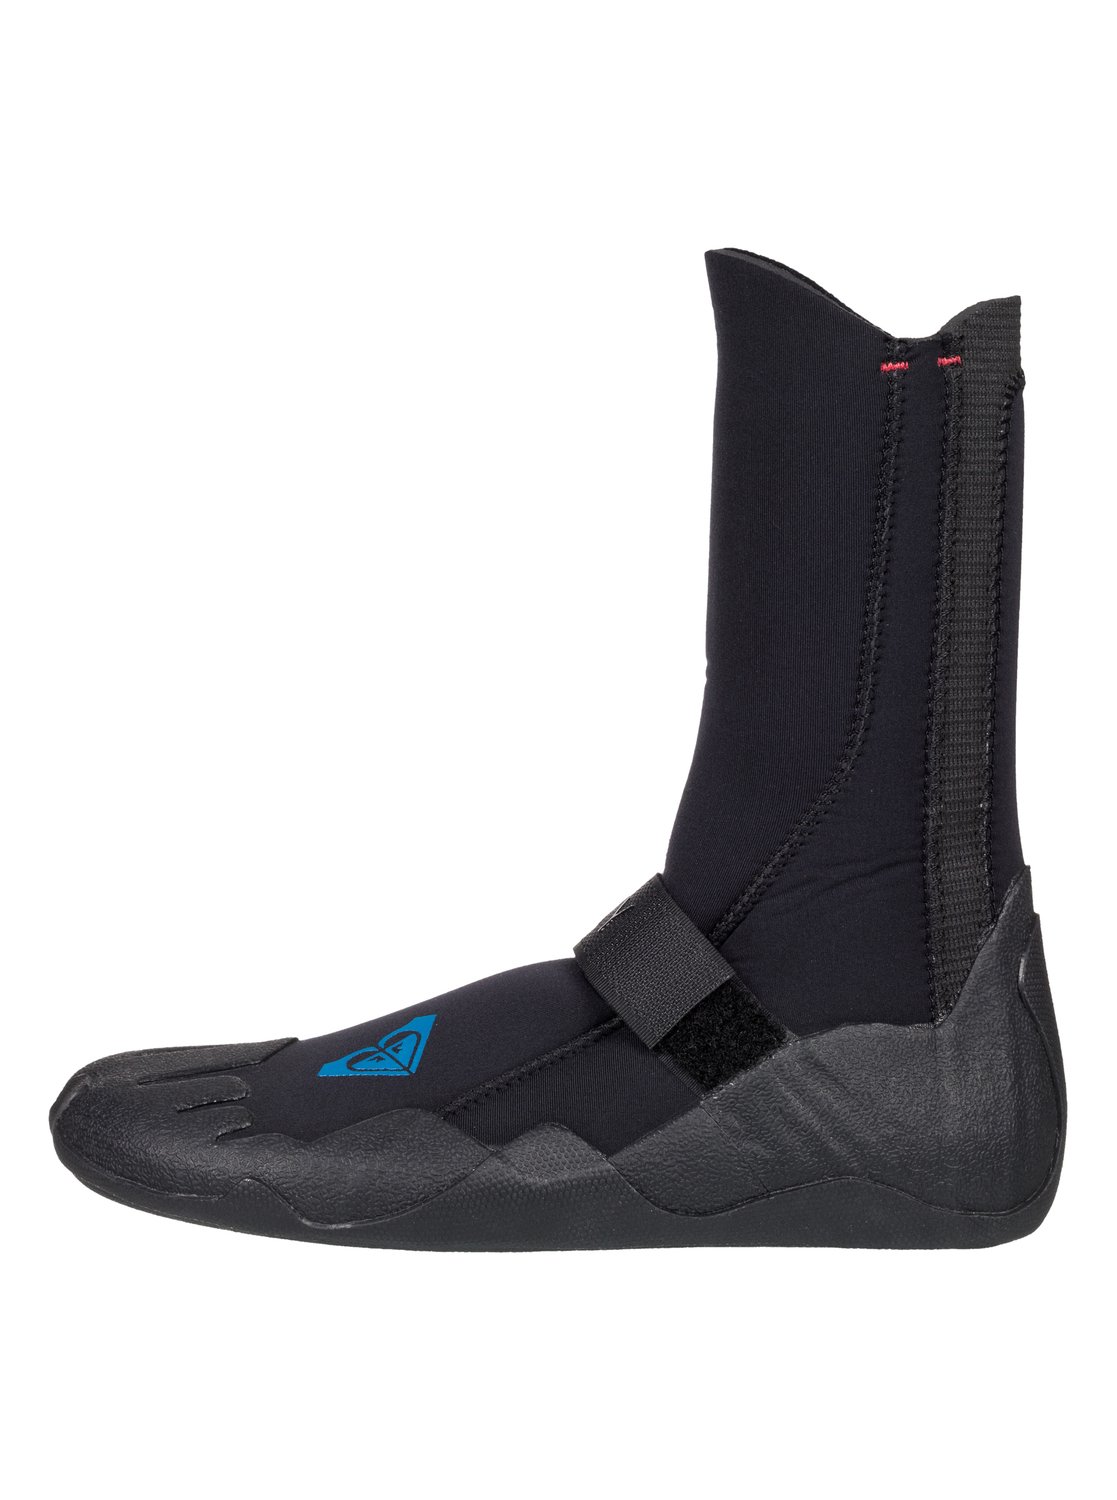 5mm Syncro Surf Boots